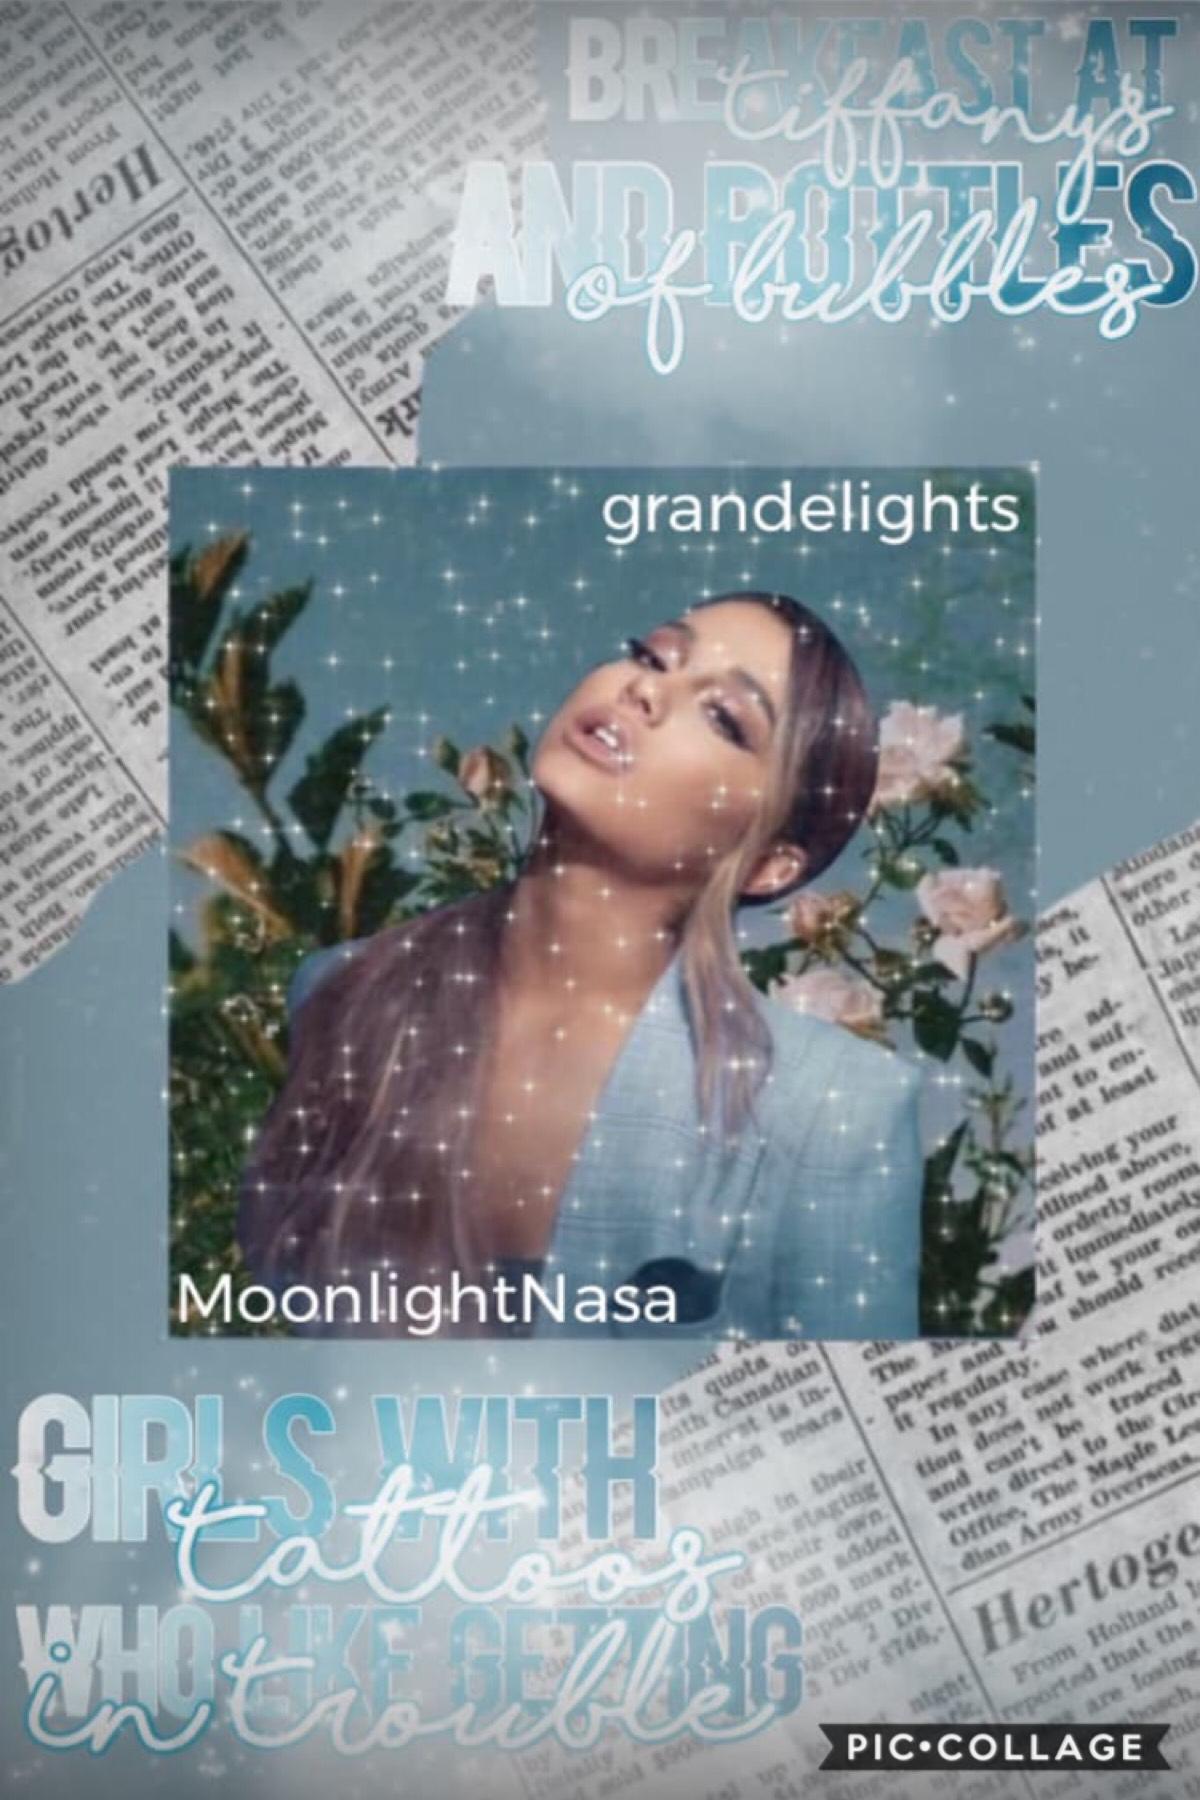 collab with... (tap)
MoonlightNasa!! i did the background and she did the beautiful text! i love the way this turned out☺️
qotd: have you ever met a celebrity?
aotd: nopeee😪
